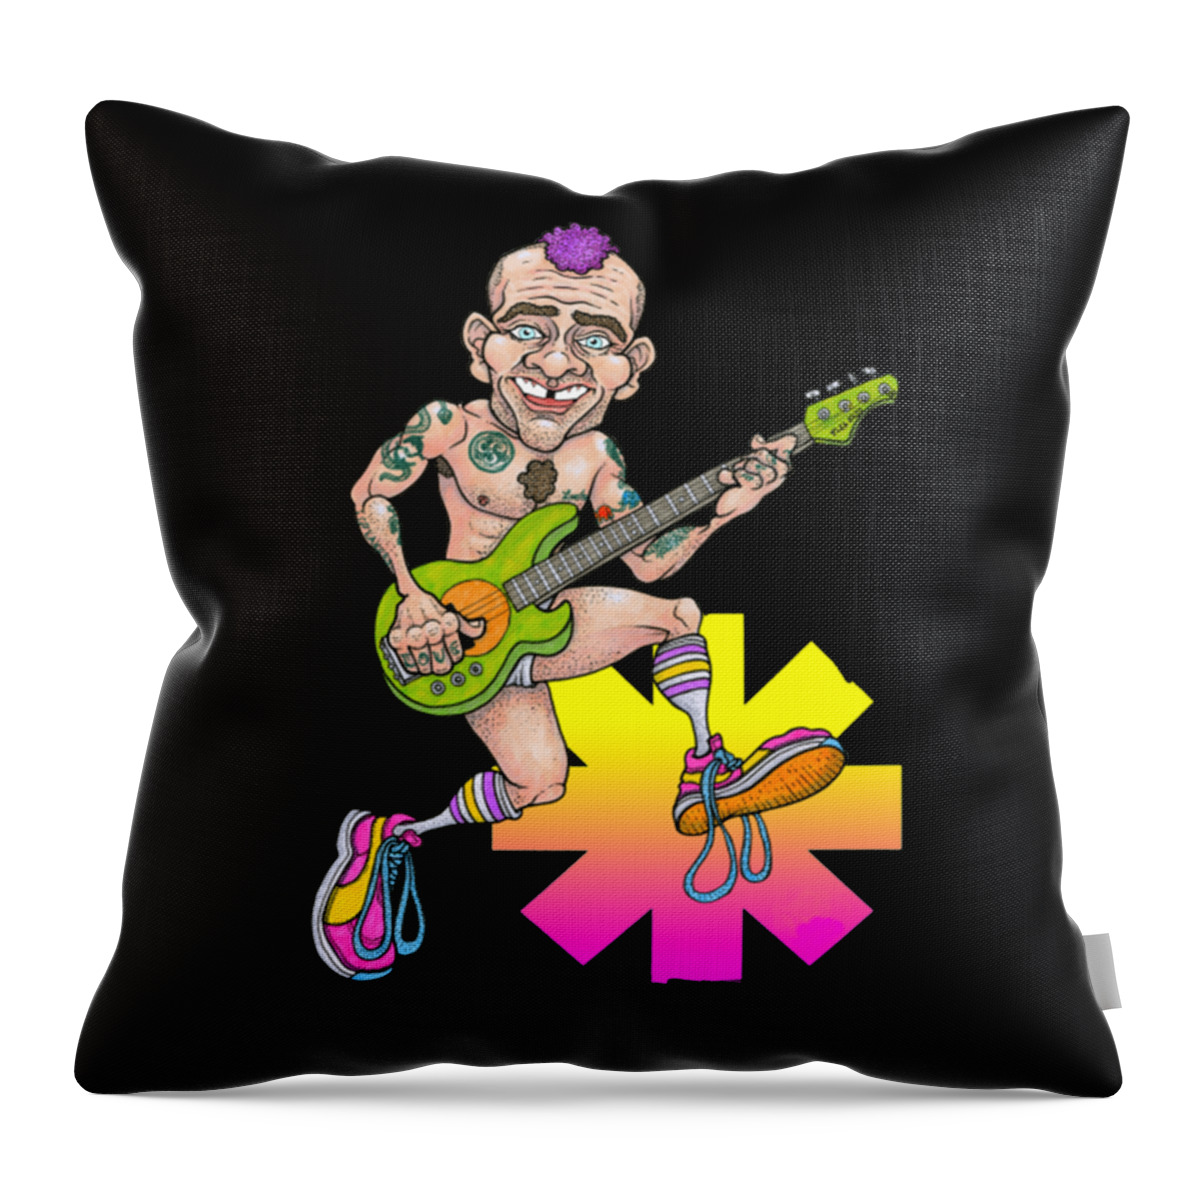 Red Hot Chili Peppers Throw Pillow featuring the digital art Once Upon A Time Newest Hot Chili Design Peppers by Notorious Artist